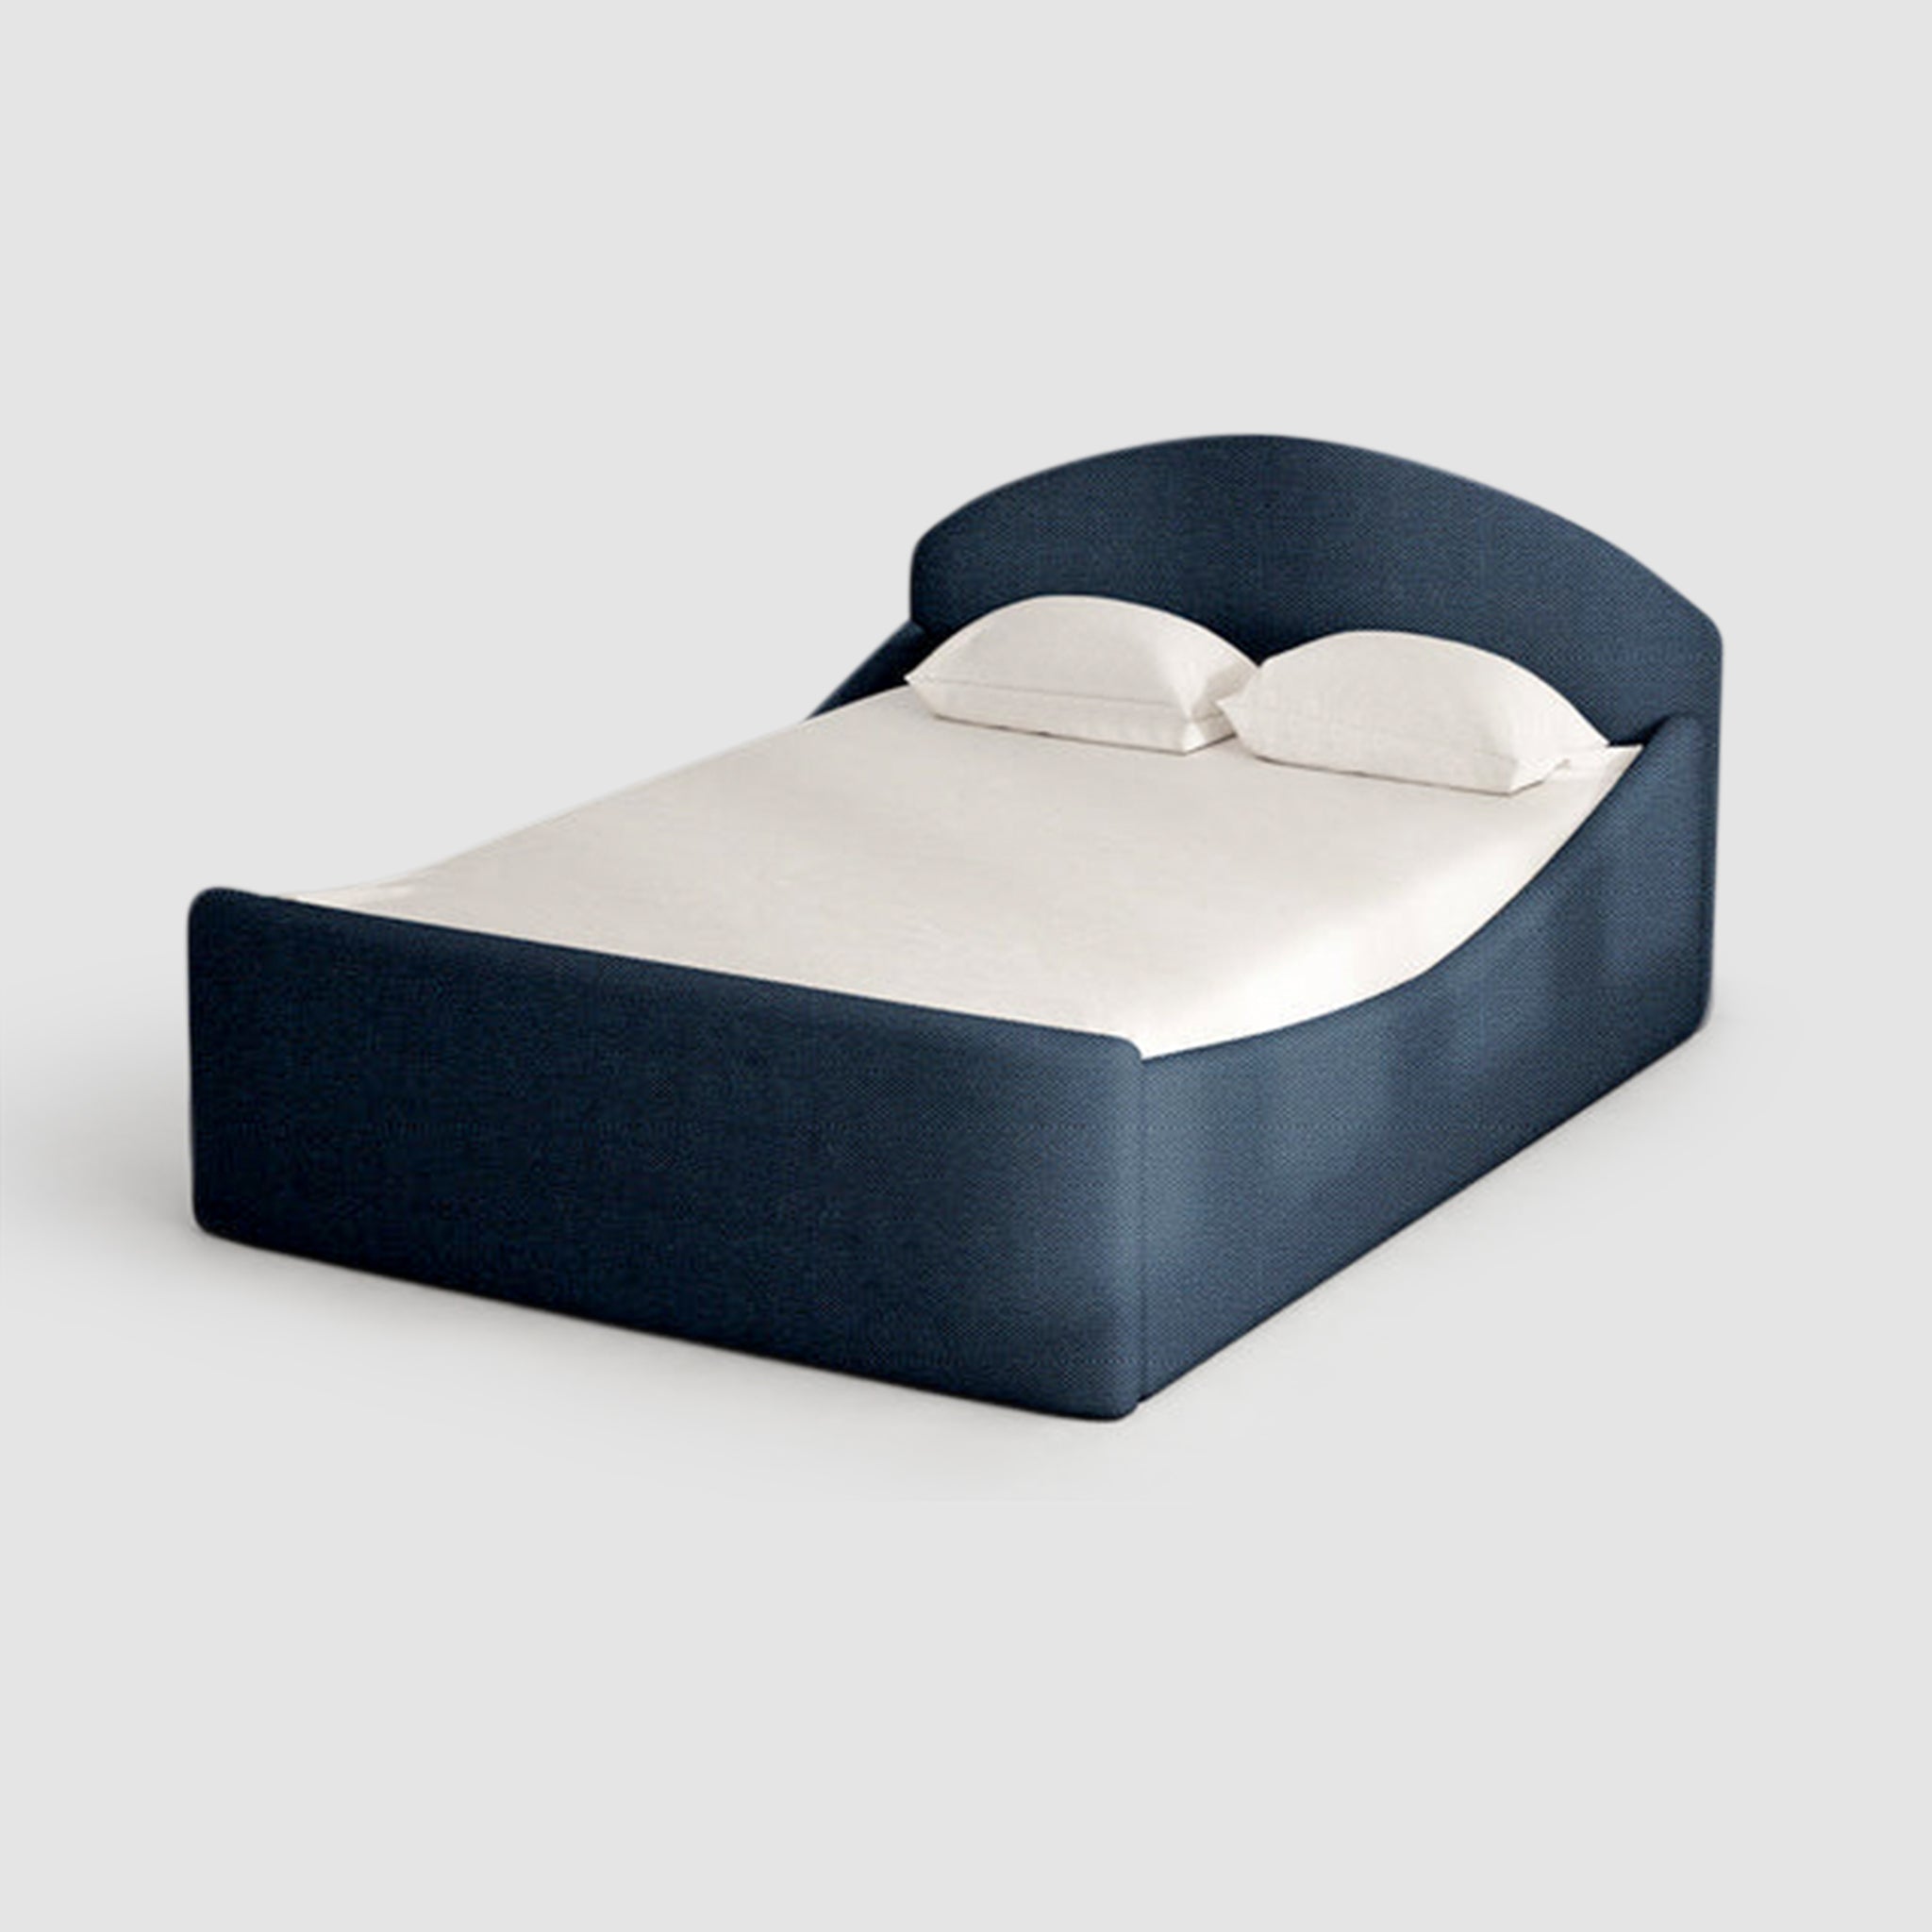 The Alice Bed in navy blue with curved headboard, elegant and modern bedroom decor